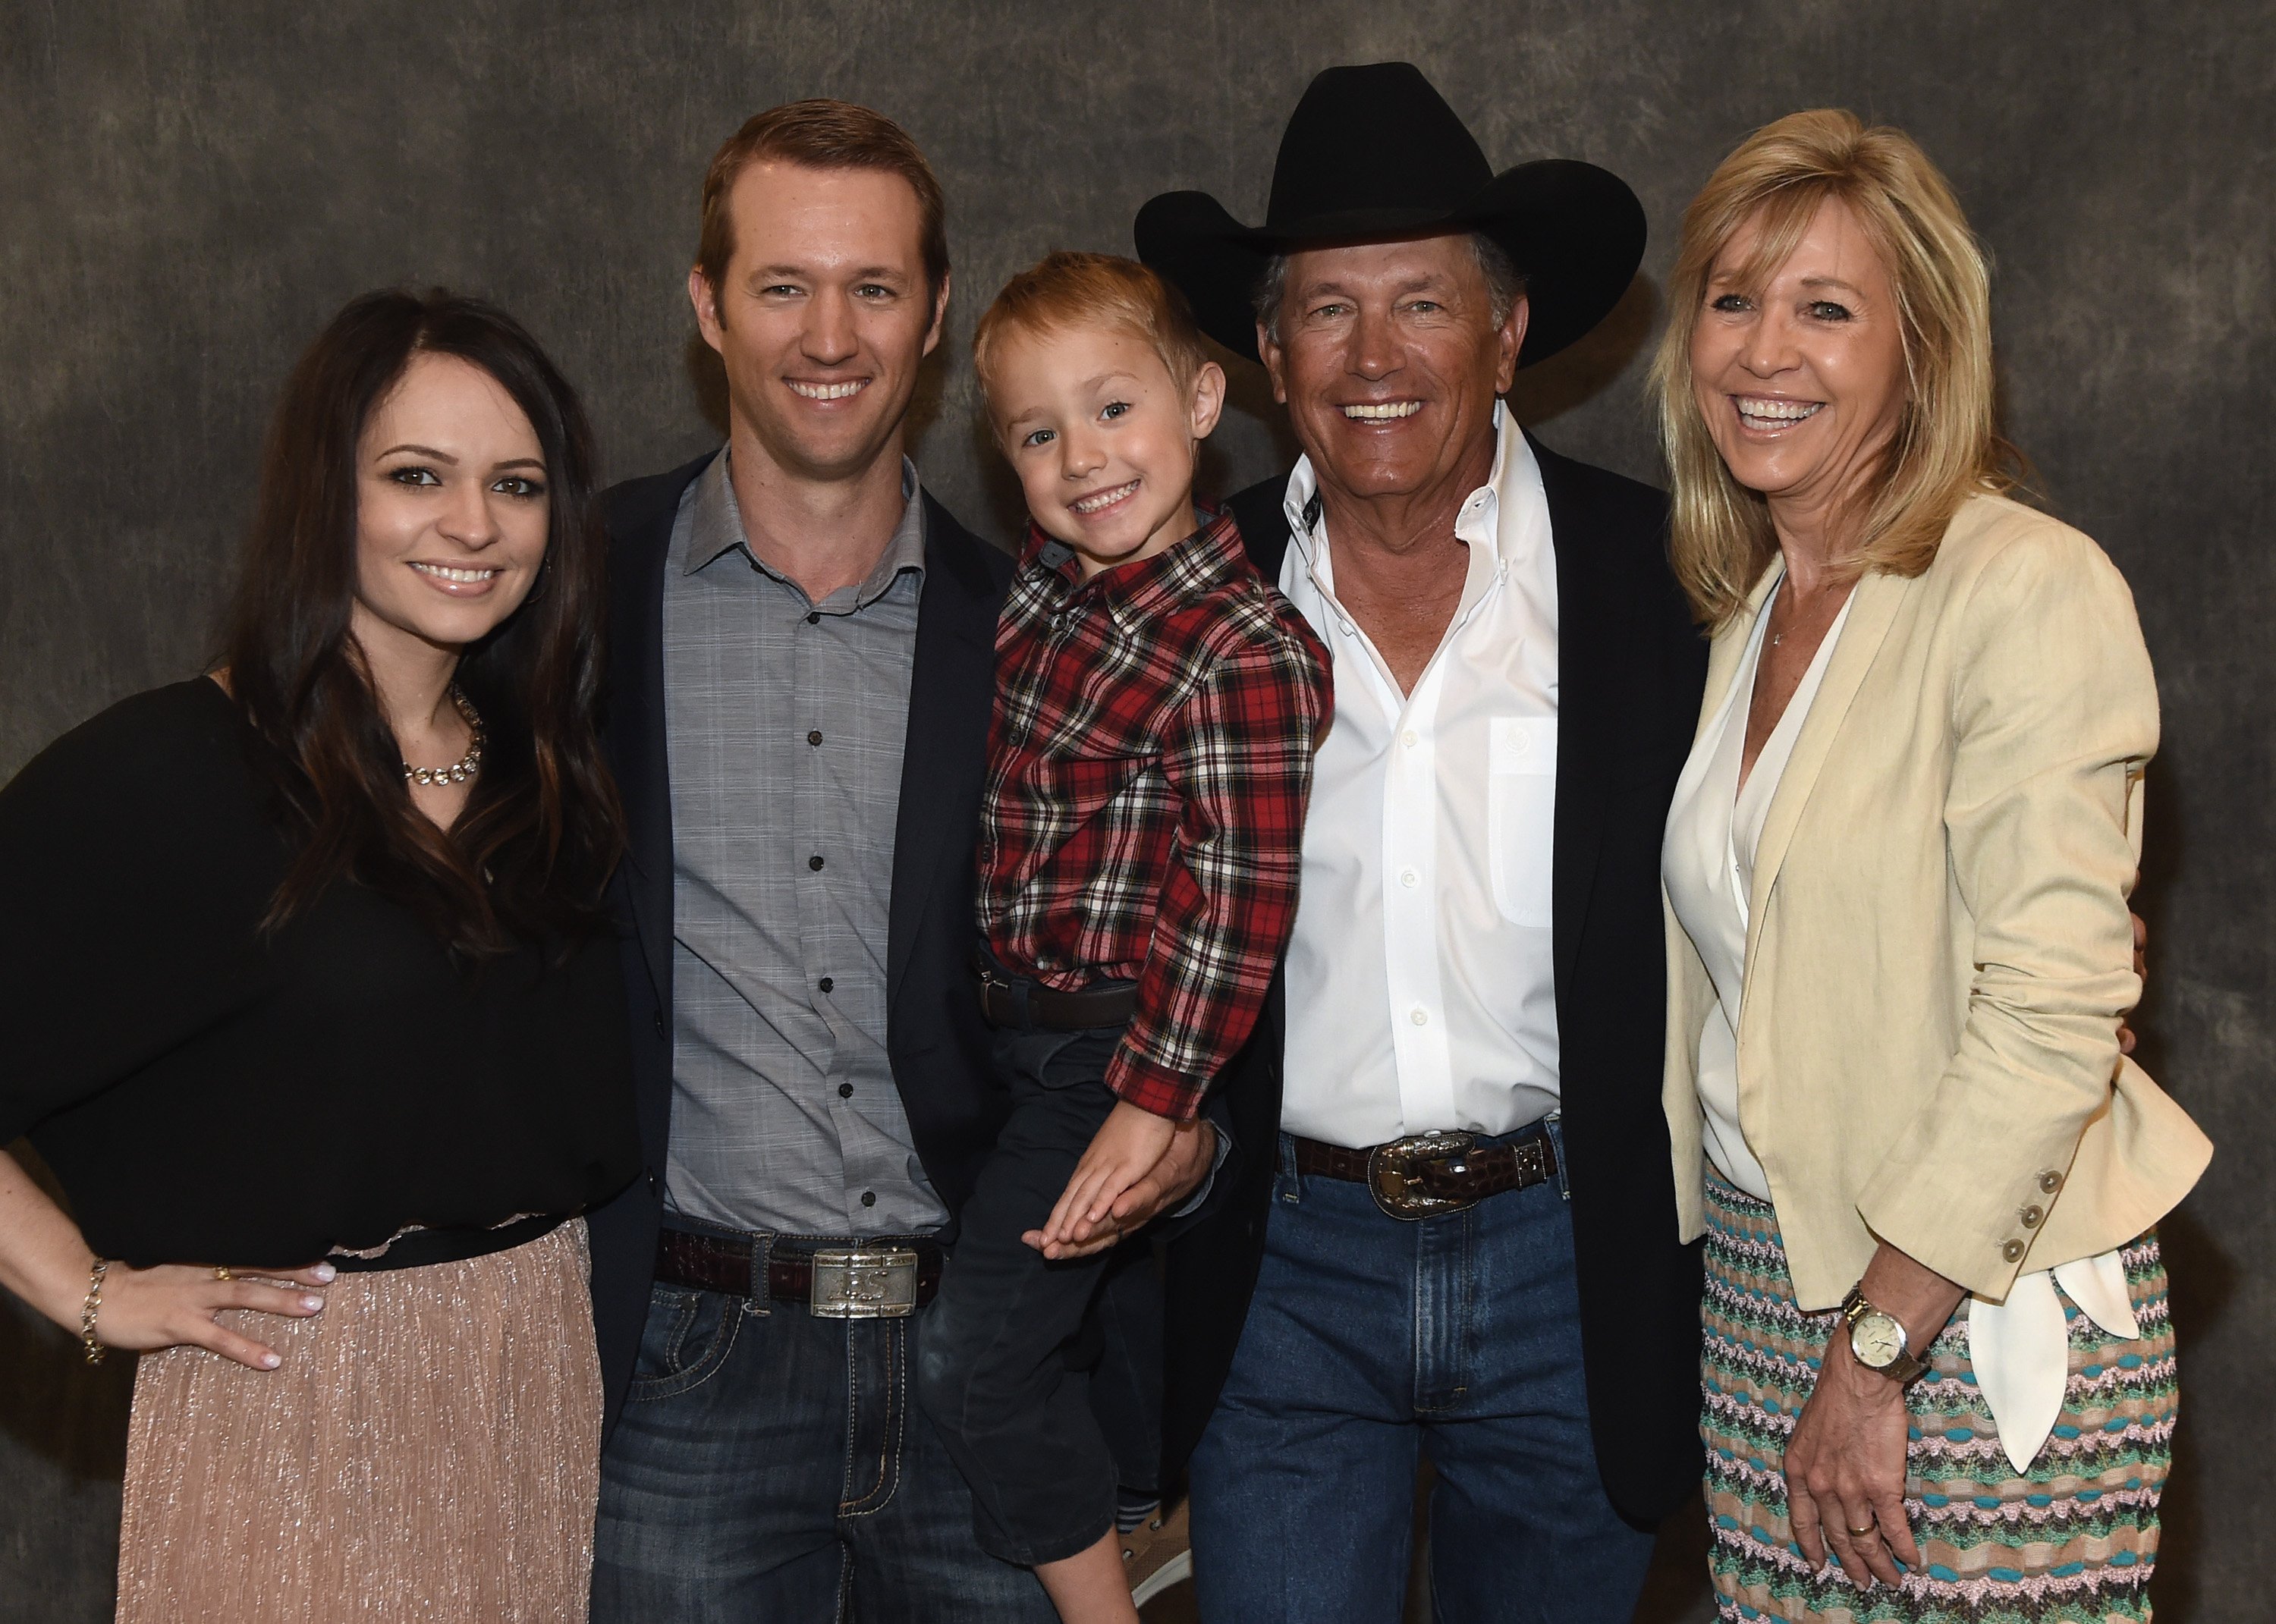 Strait, Who Is Now a Grandad of 2, Sells Family Ranch He Bought